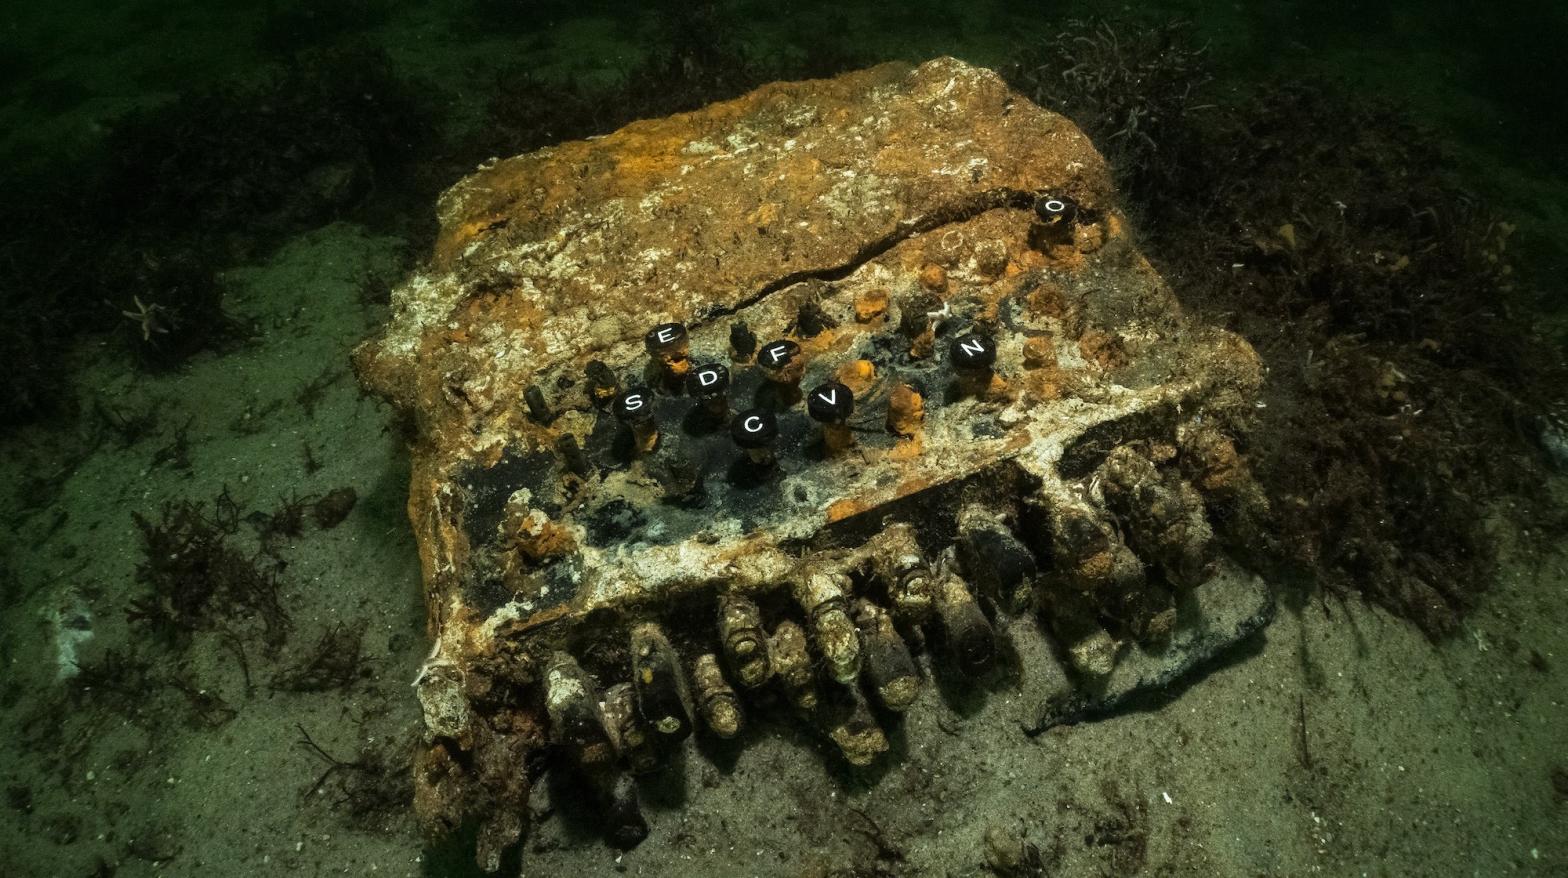 The three-rotor Enigma machine at the bottom of the Baltic Sea.  (Image: Florian Huber)